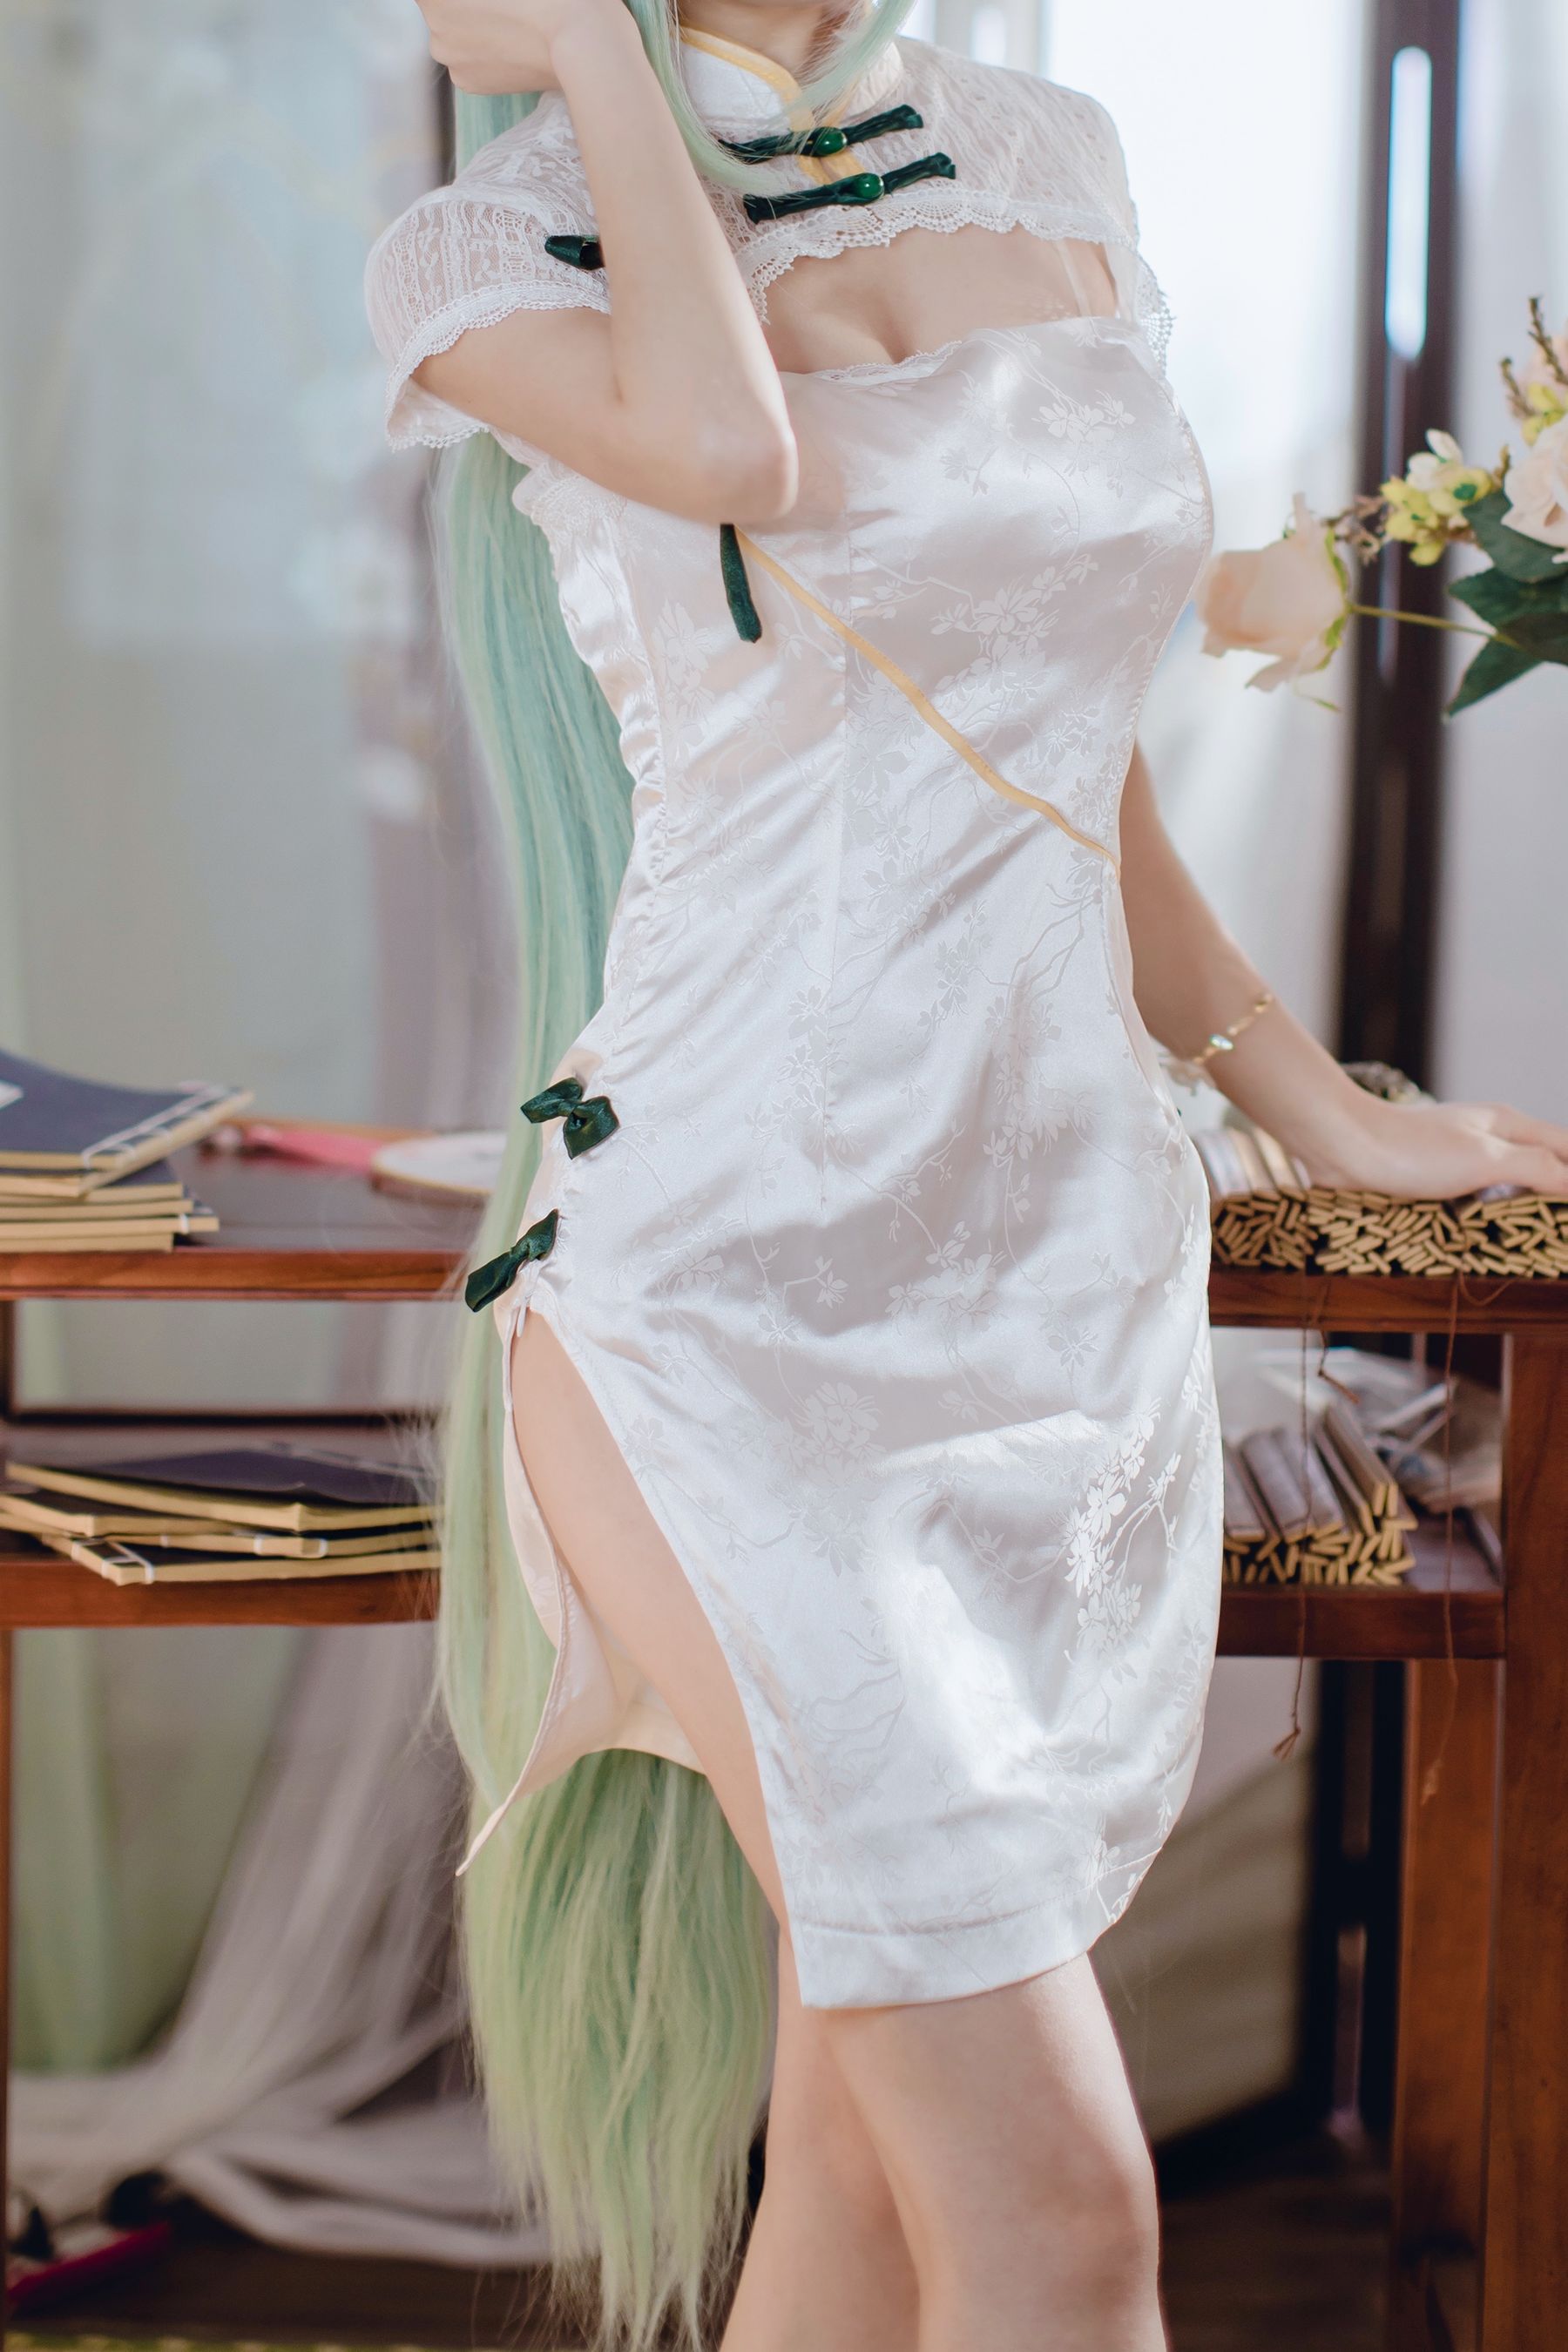 COSER clothing – Total 华 photo set